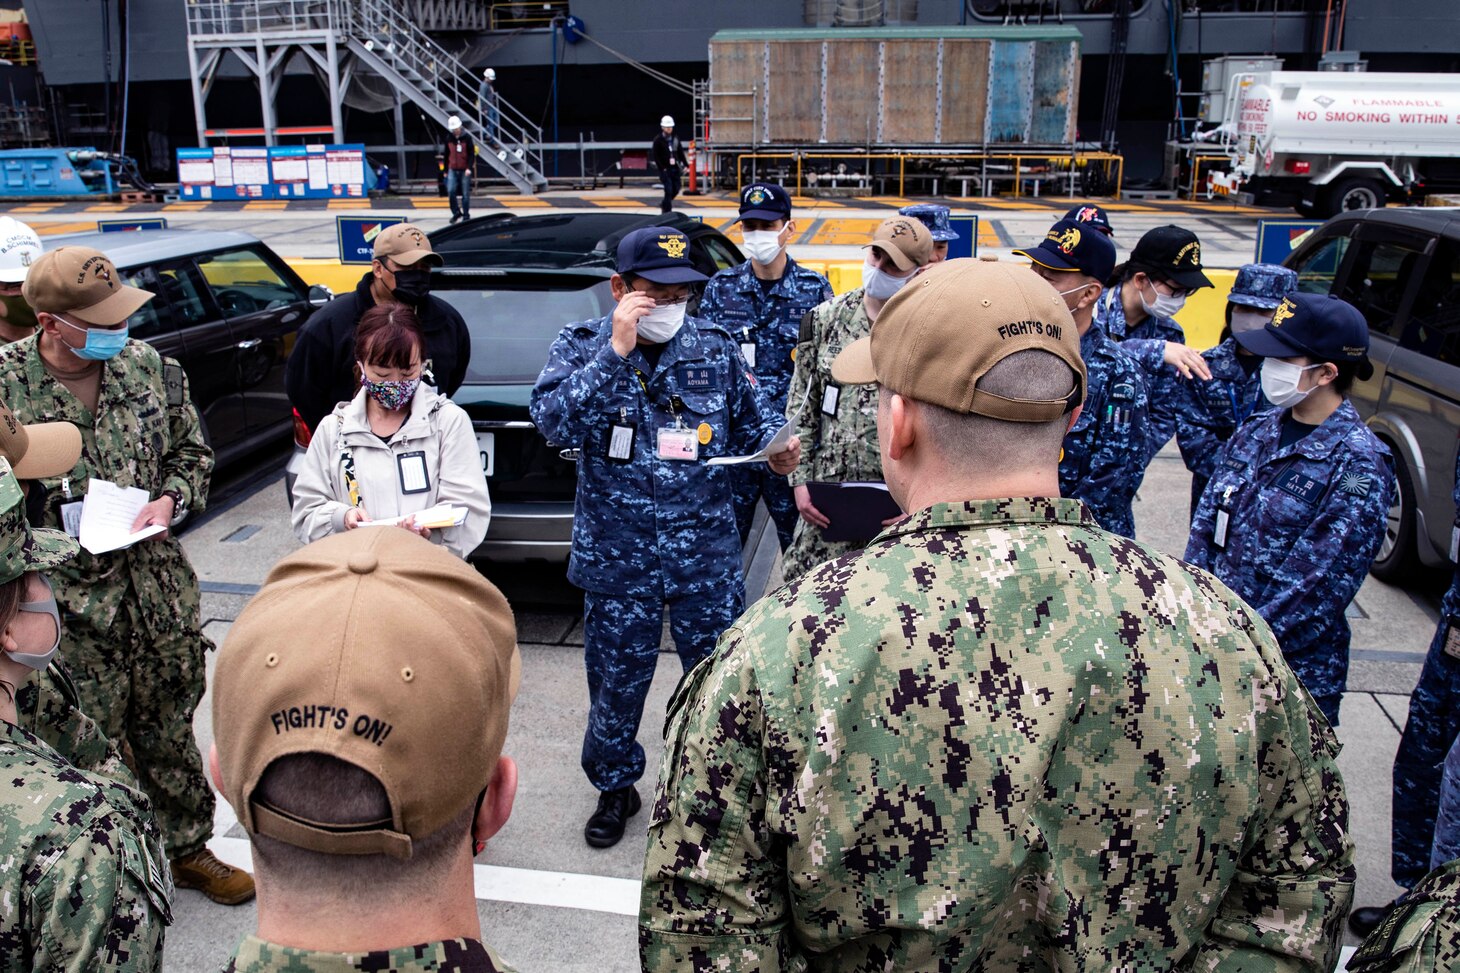 220405-N-MM501-1110 YOKOSUKA, Japan (April 5, 2022) Japan Self-Defense Fleet Master Chief Yoshihiro Aoyama, speaks to Japan Maritime Self-Defense Force and U.S. Navy Sailors on the pier before touring the U.S. Navy’s only forward-deployed aircraft carrier USS Ronald Reagan (CVN 76) during the U.S. 7th Fleet Sailor of the Year Week, April 5. U.S. 7th Fleet conducts forward-deployed naval operations in support of U.S. national interests in the Indo-Asia-Pacific area of operations. As the U.S. Navy’s largest numbered fleet, 7th Fleet interacts with 35 other maritime nations to build maritime partnerships that foster maritime security, promote stability, and prevent conflict. (U.S. Navy photo by Mass Communication Specialist 2nd Class Shannon Burns)